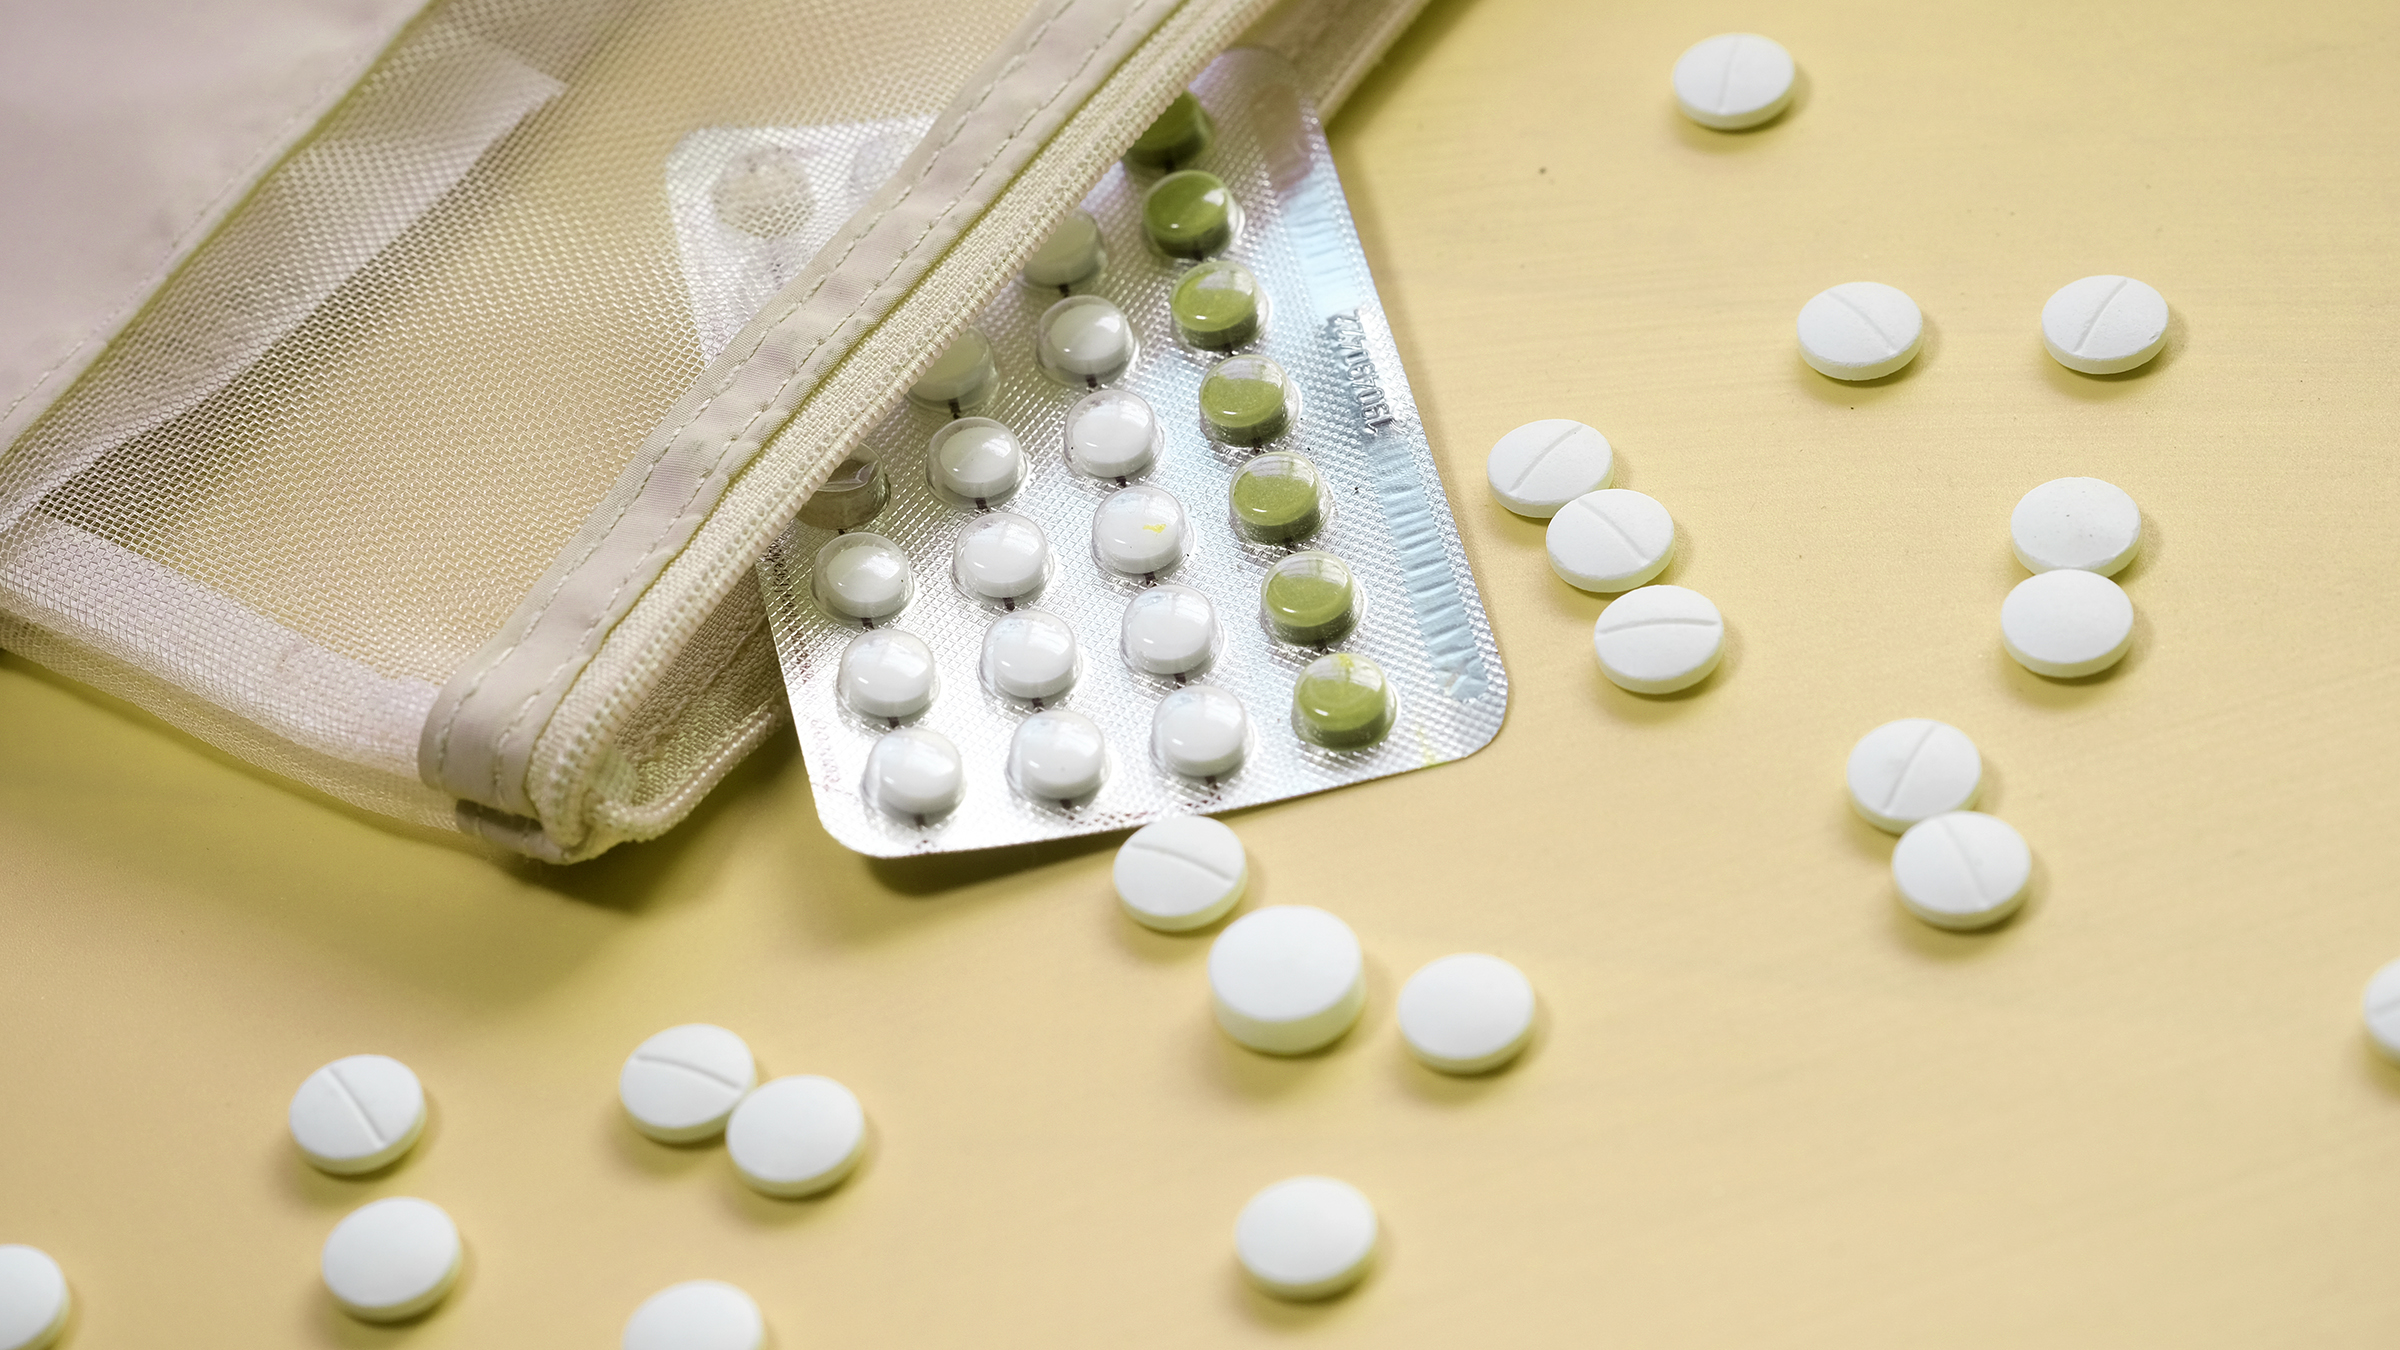 Birth control pills scattered around a pill pack that is in a mesh carrying pouch. The background is light yellow.
towfiqu ahamed/iStock via Getty Images